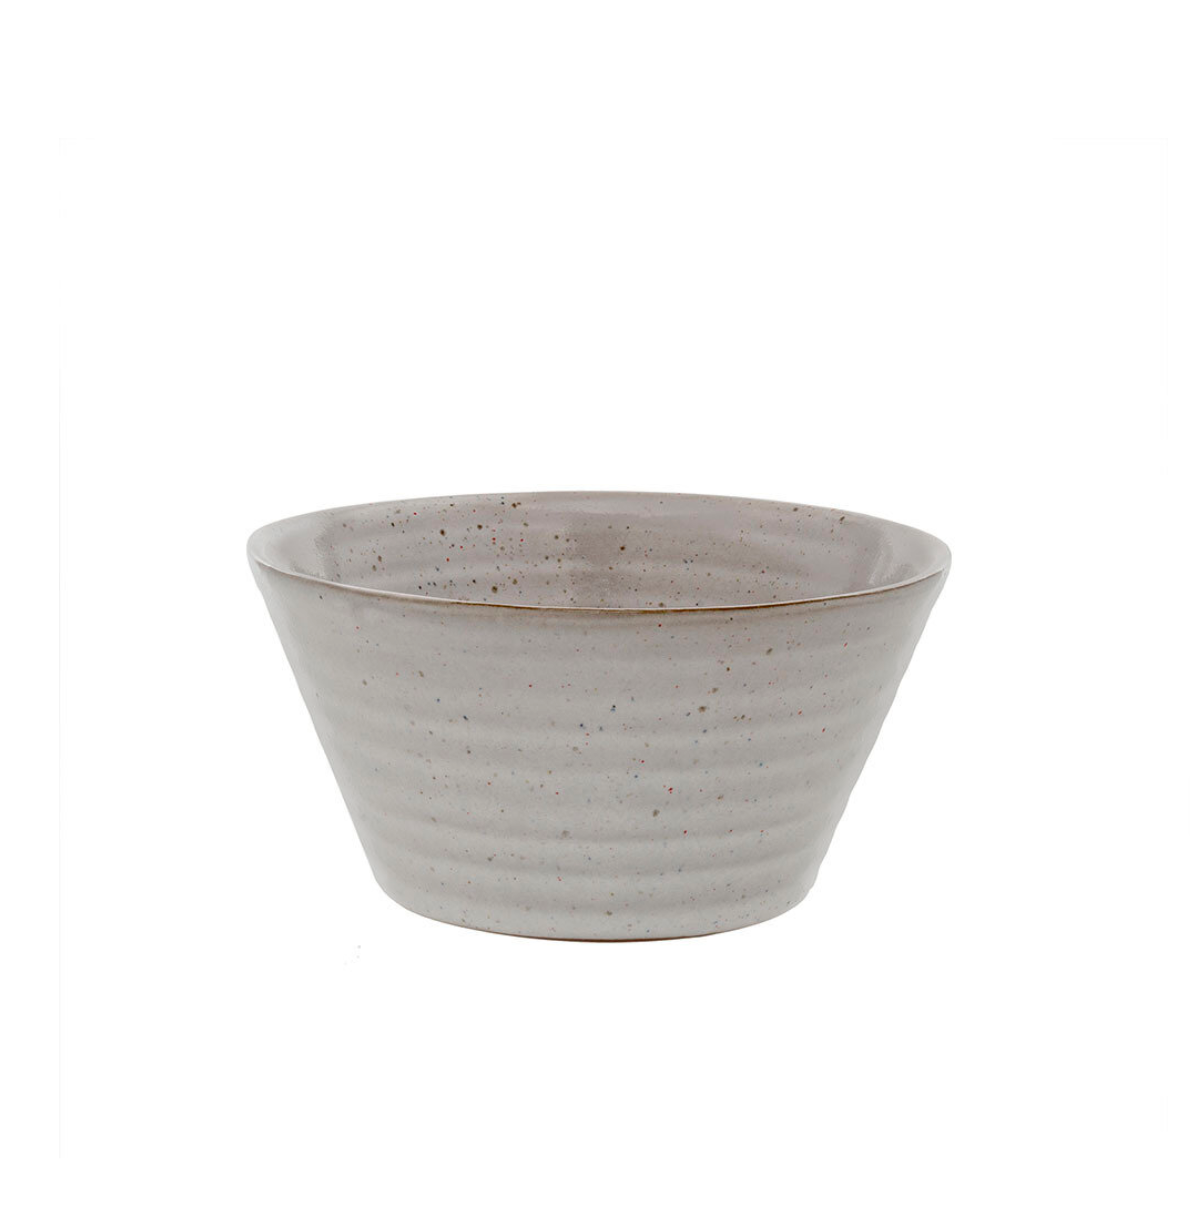 A simple, unadorned, grey ceramic Indaba Mason Bowl L with a slightly flared rim. The handcrafted bowl features a subtle speckled texture and is placed on a plain, white background. Its minimalist design suggests it could be used for various dining purposes.